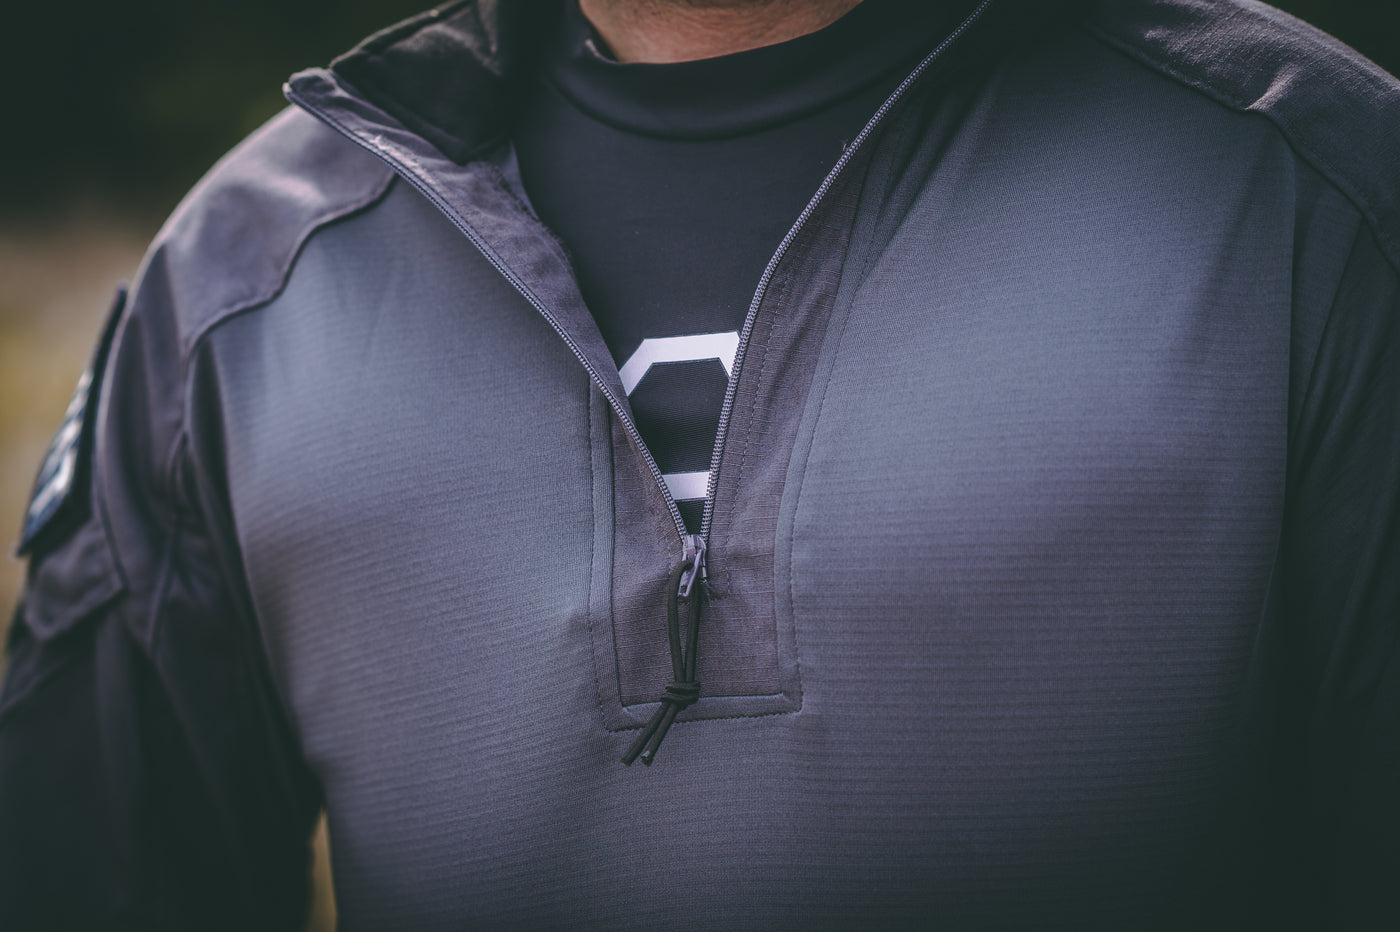 Qore Performance Range Training Base Layers have pockets over the pulse points for disposable heaters and hand warmers to warm you from the inside out